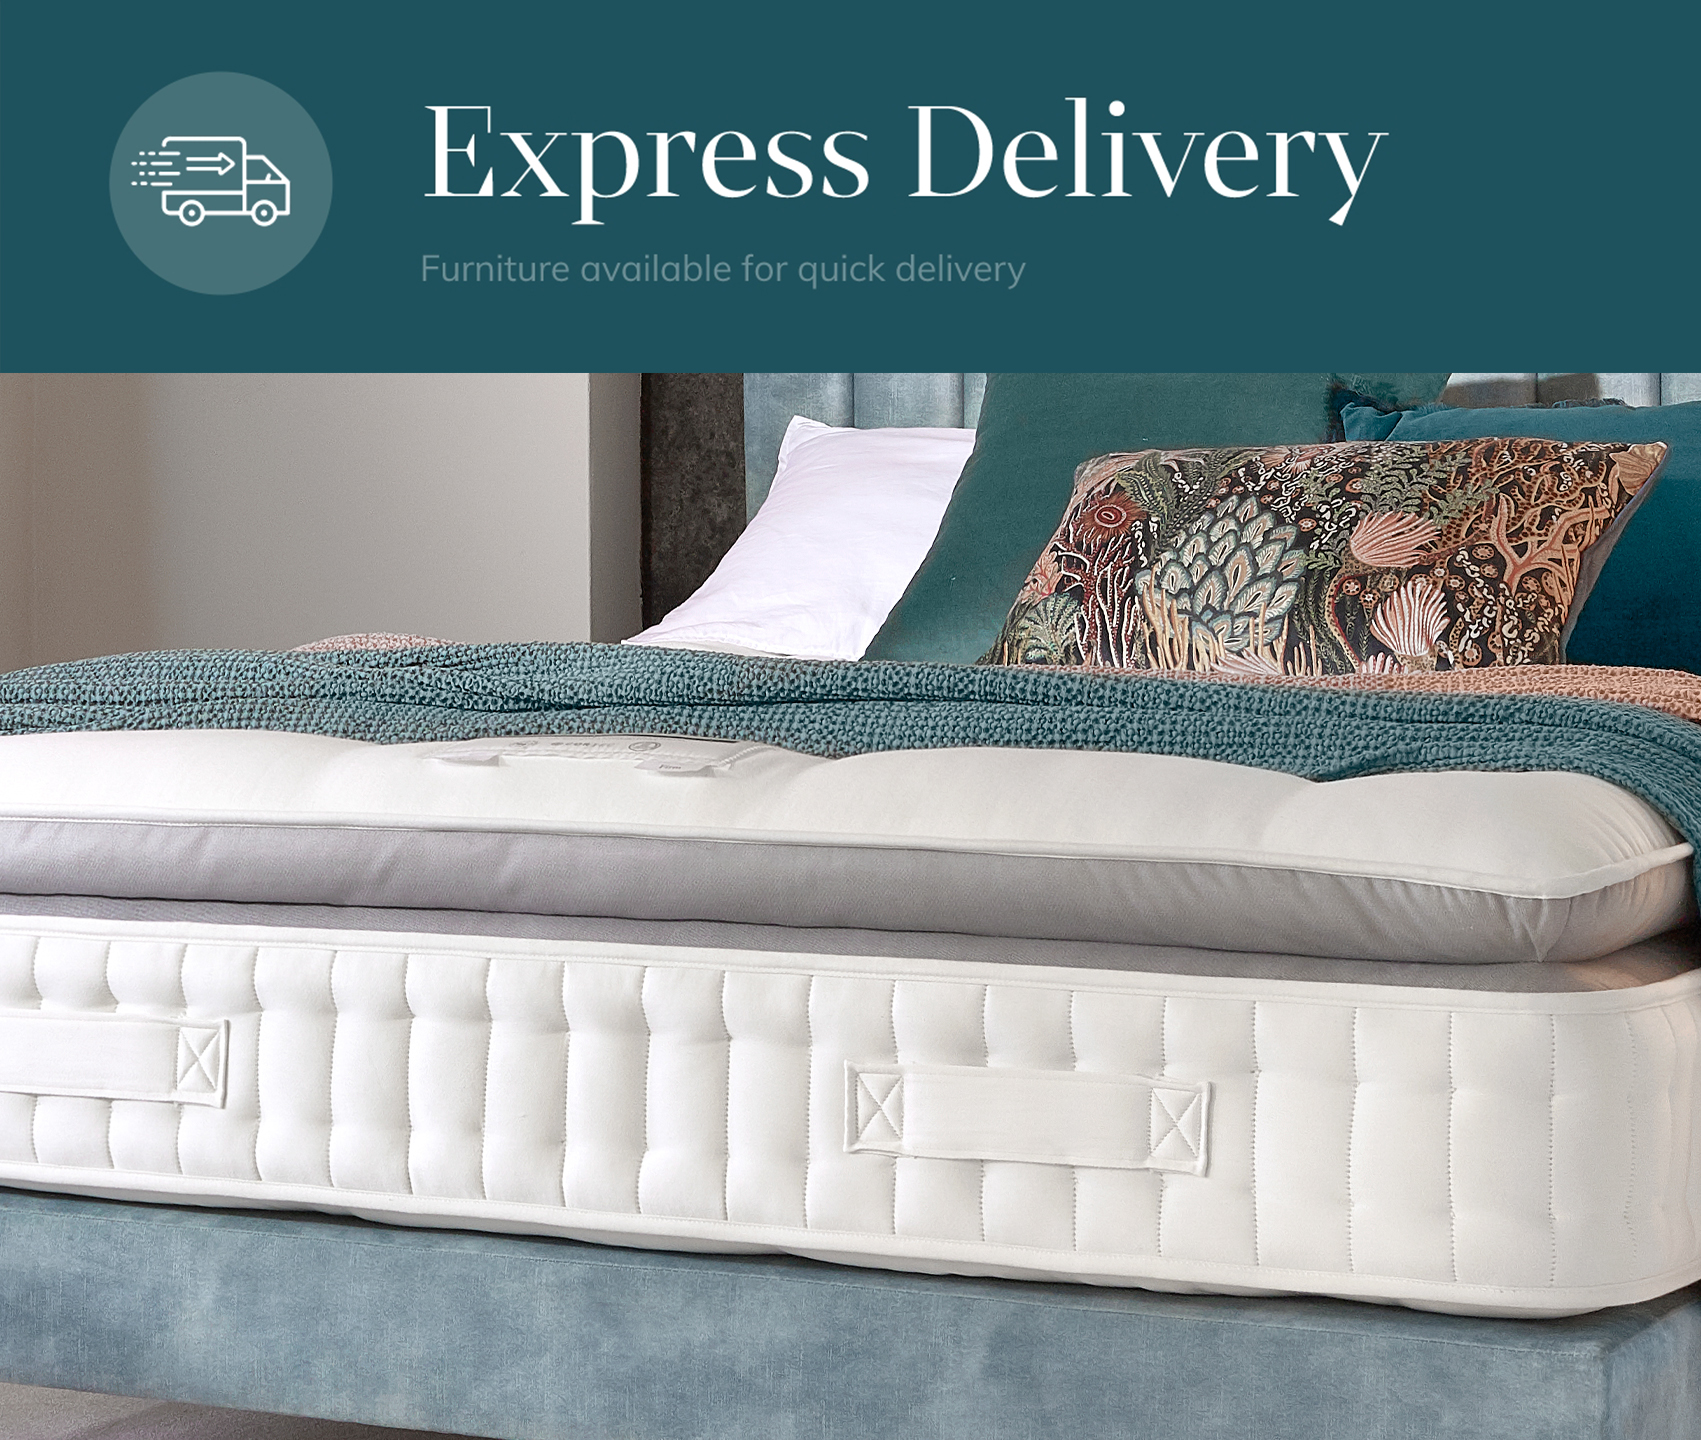 ExpressDelivery_Mobile_Mattresses